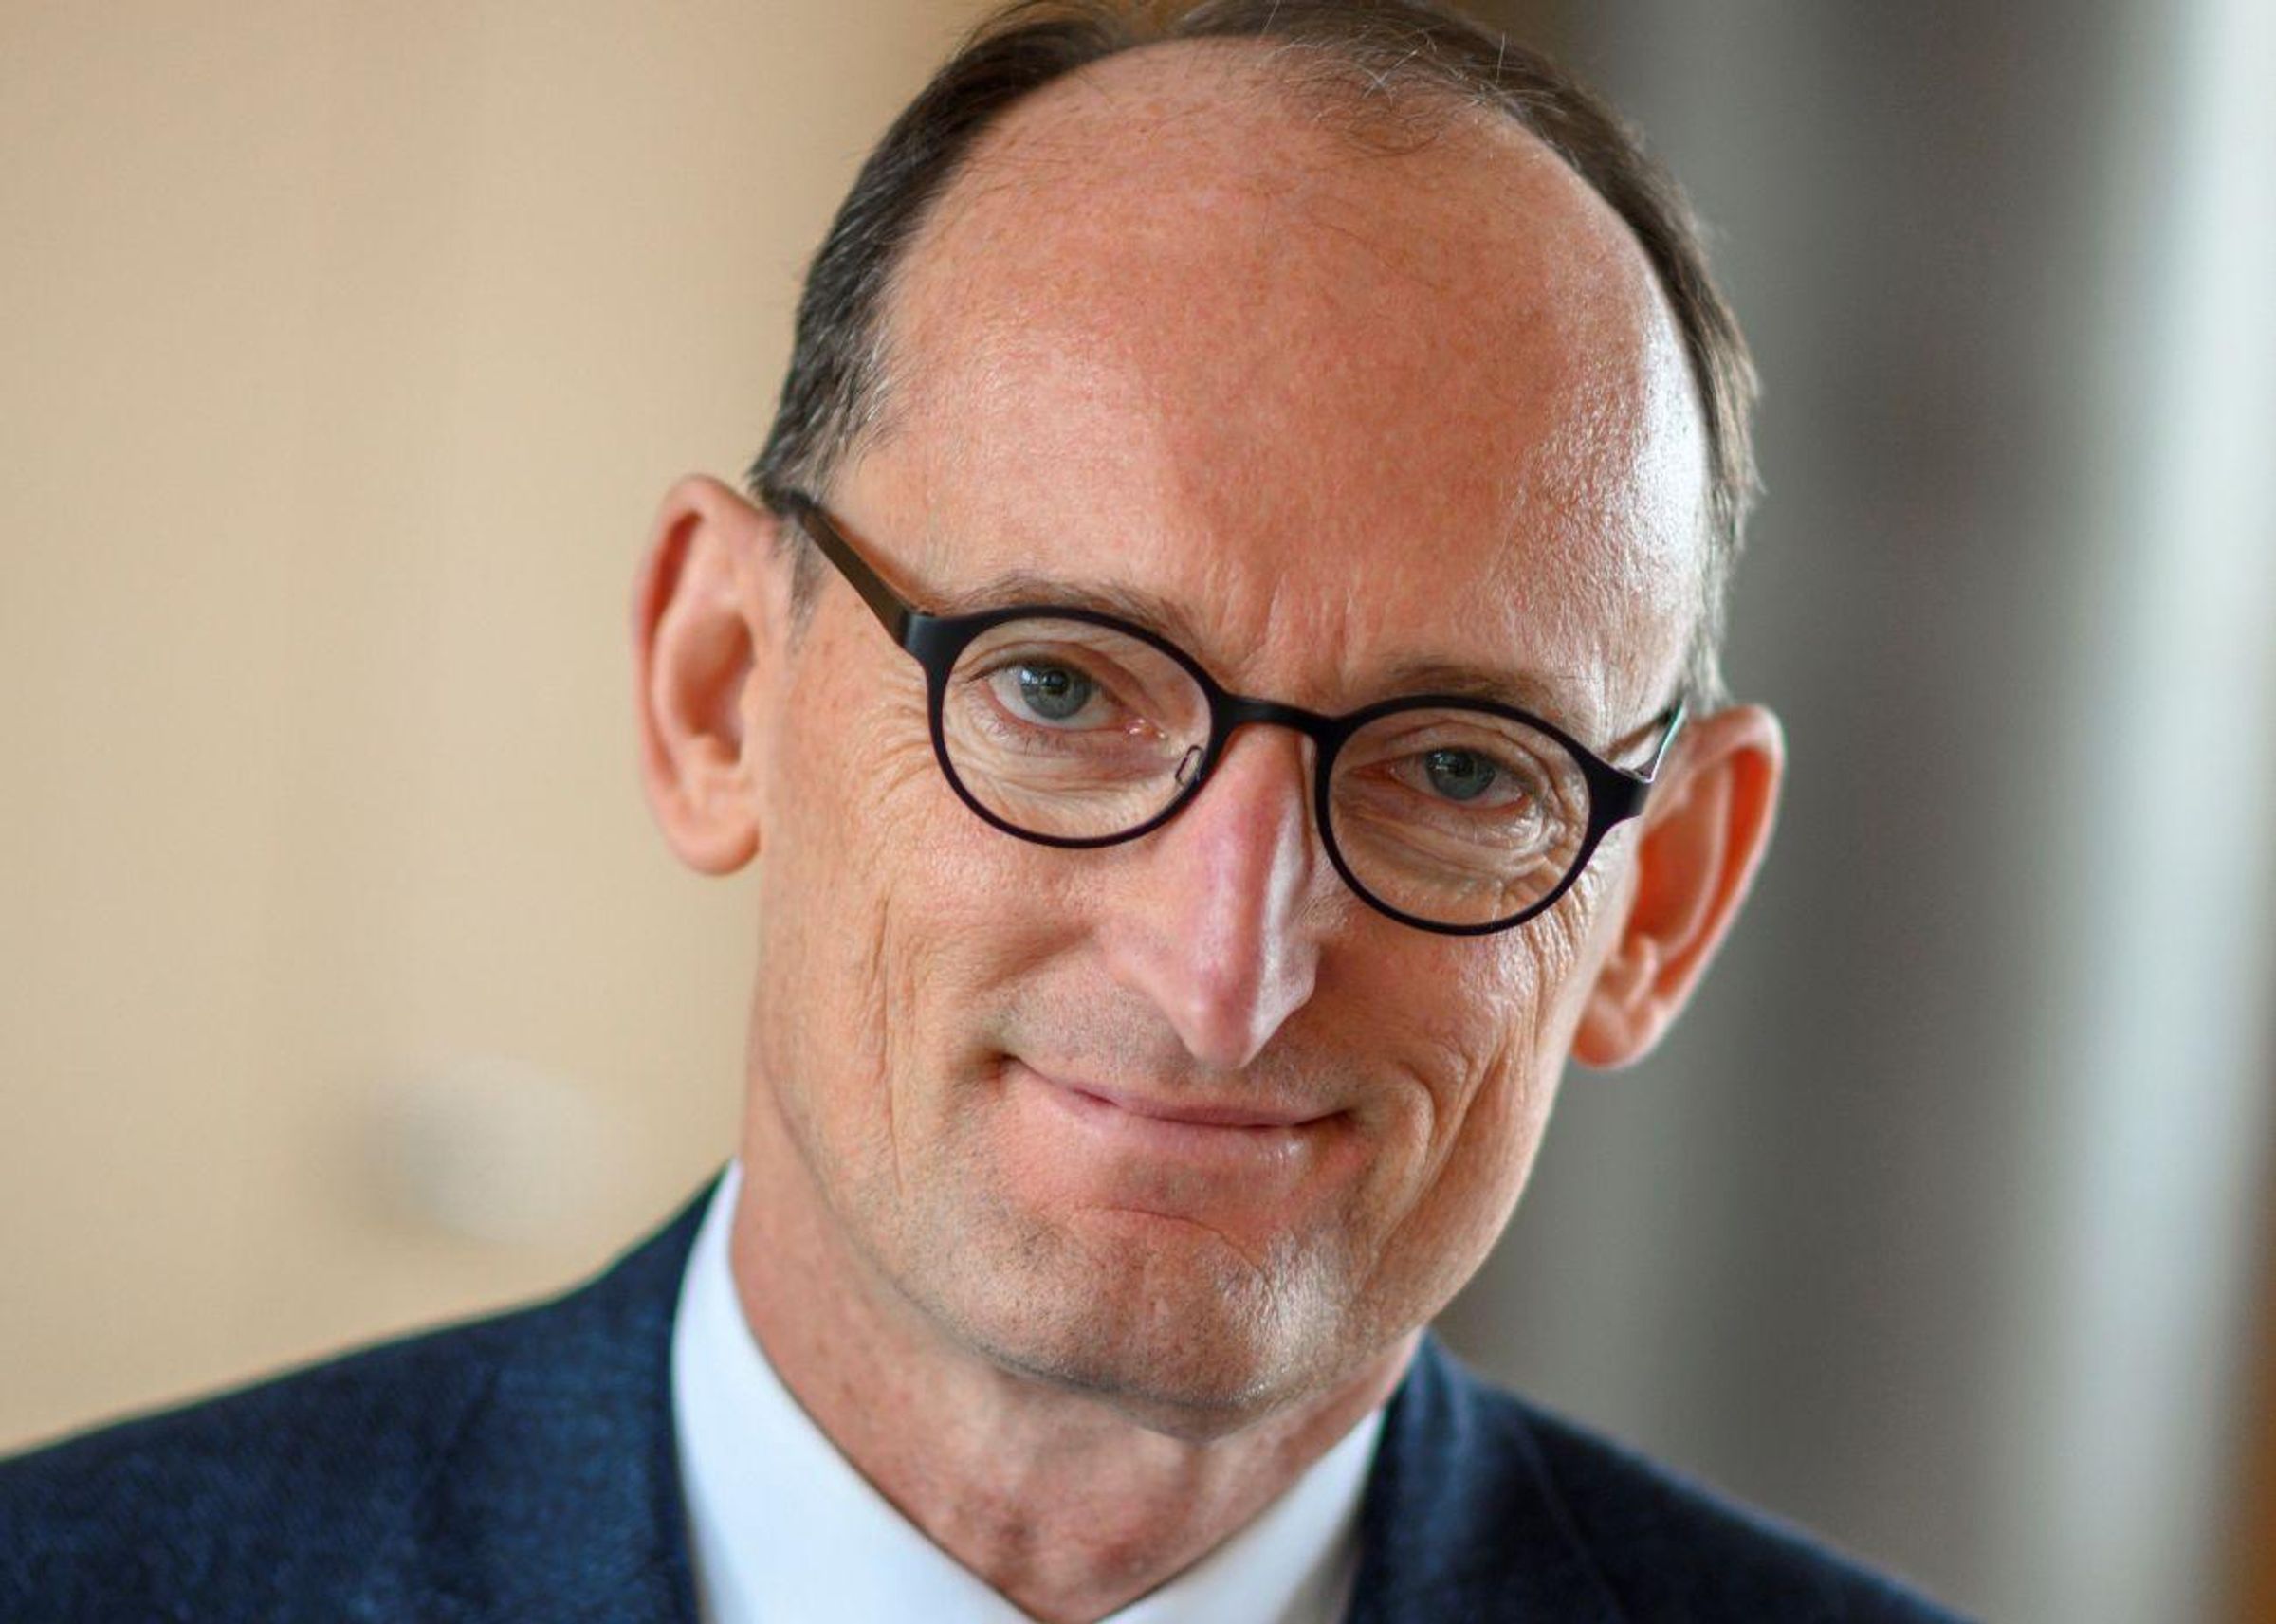 Christophe Babule - Independant Director at the Board of Directors of Sanofi and Member of the Audit Committee